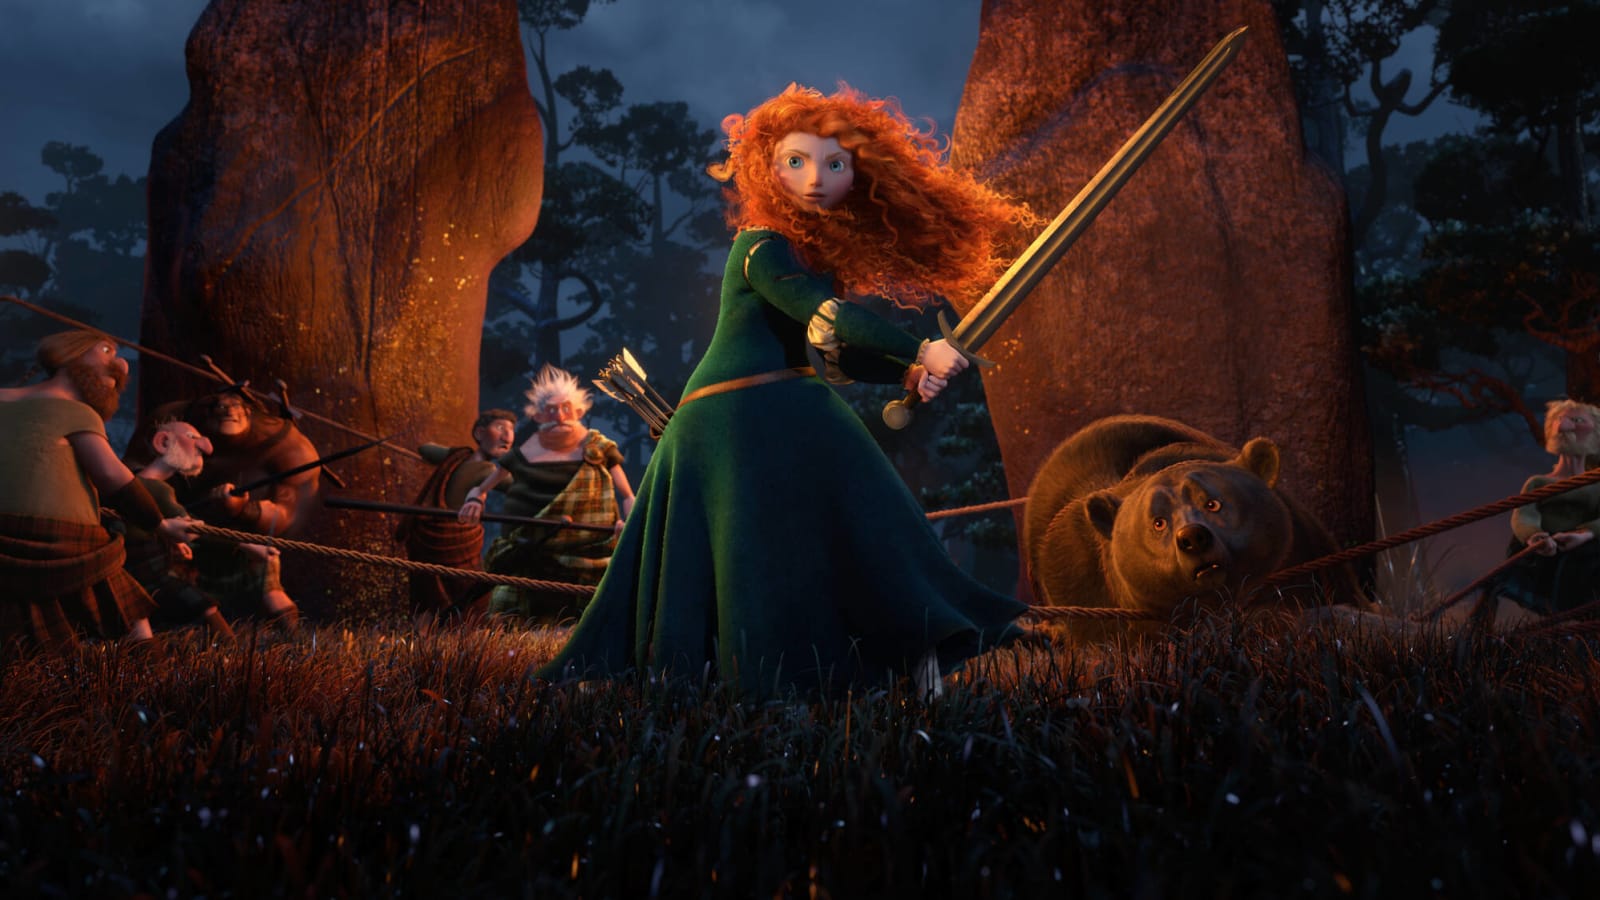 20 facts you might not know about 'Brave'